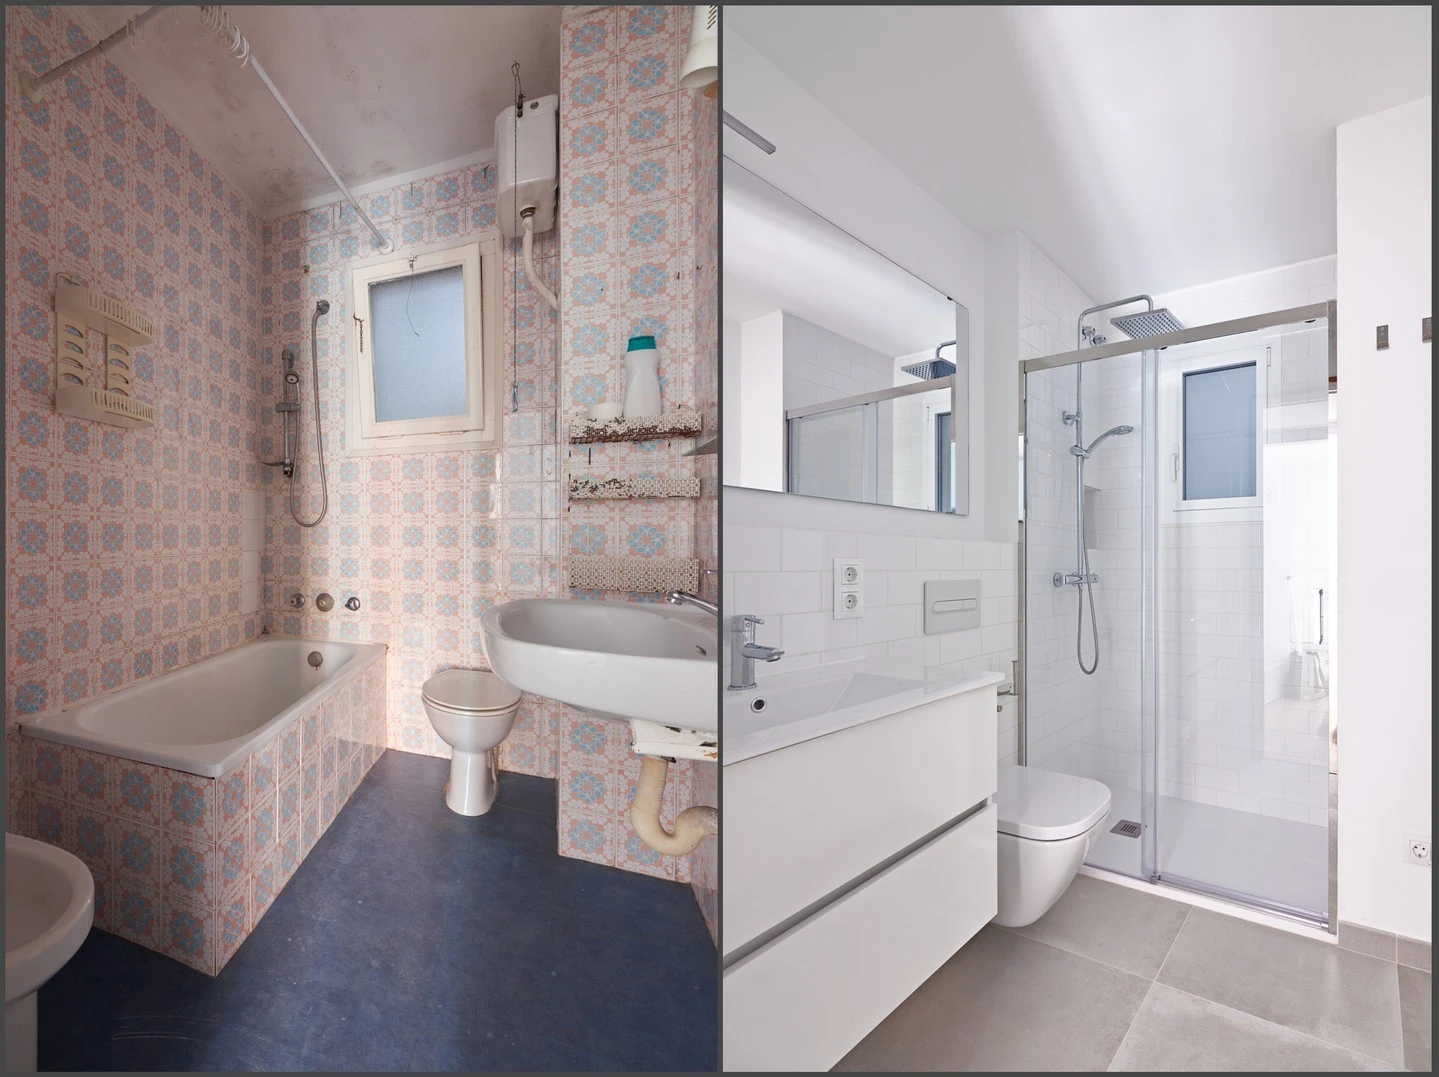  A bathroom remodeling project before and after it has been completed by Mr. Handyman.